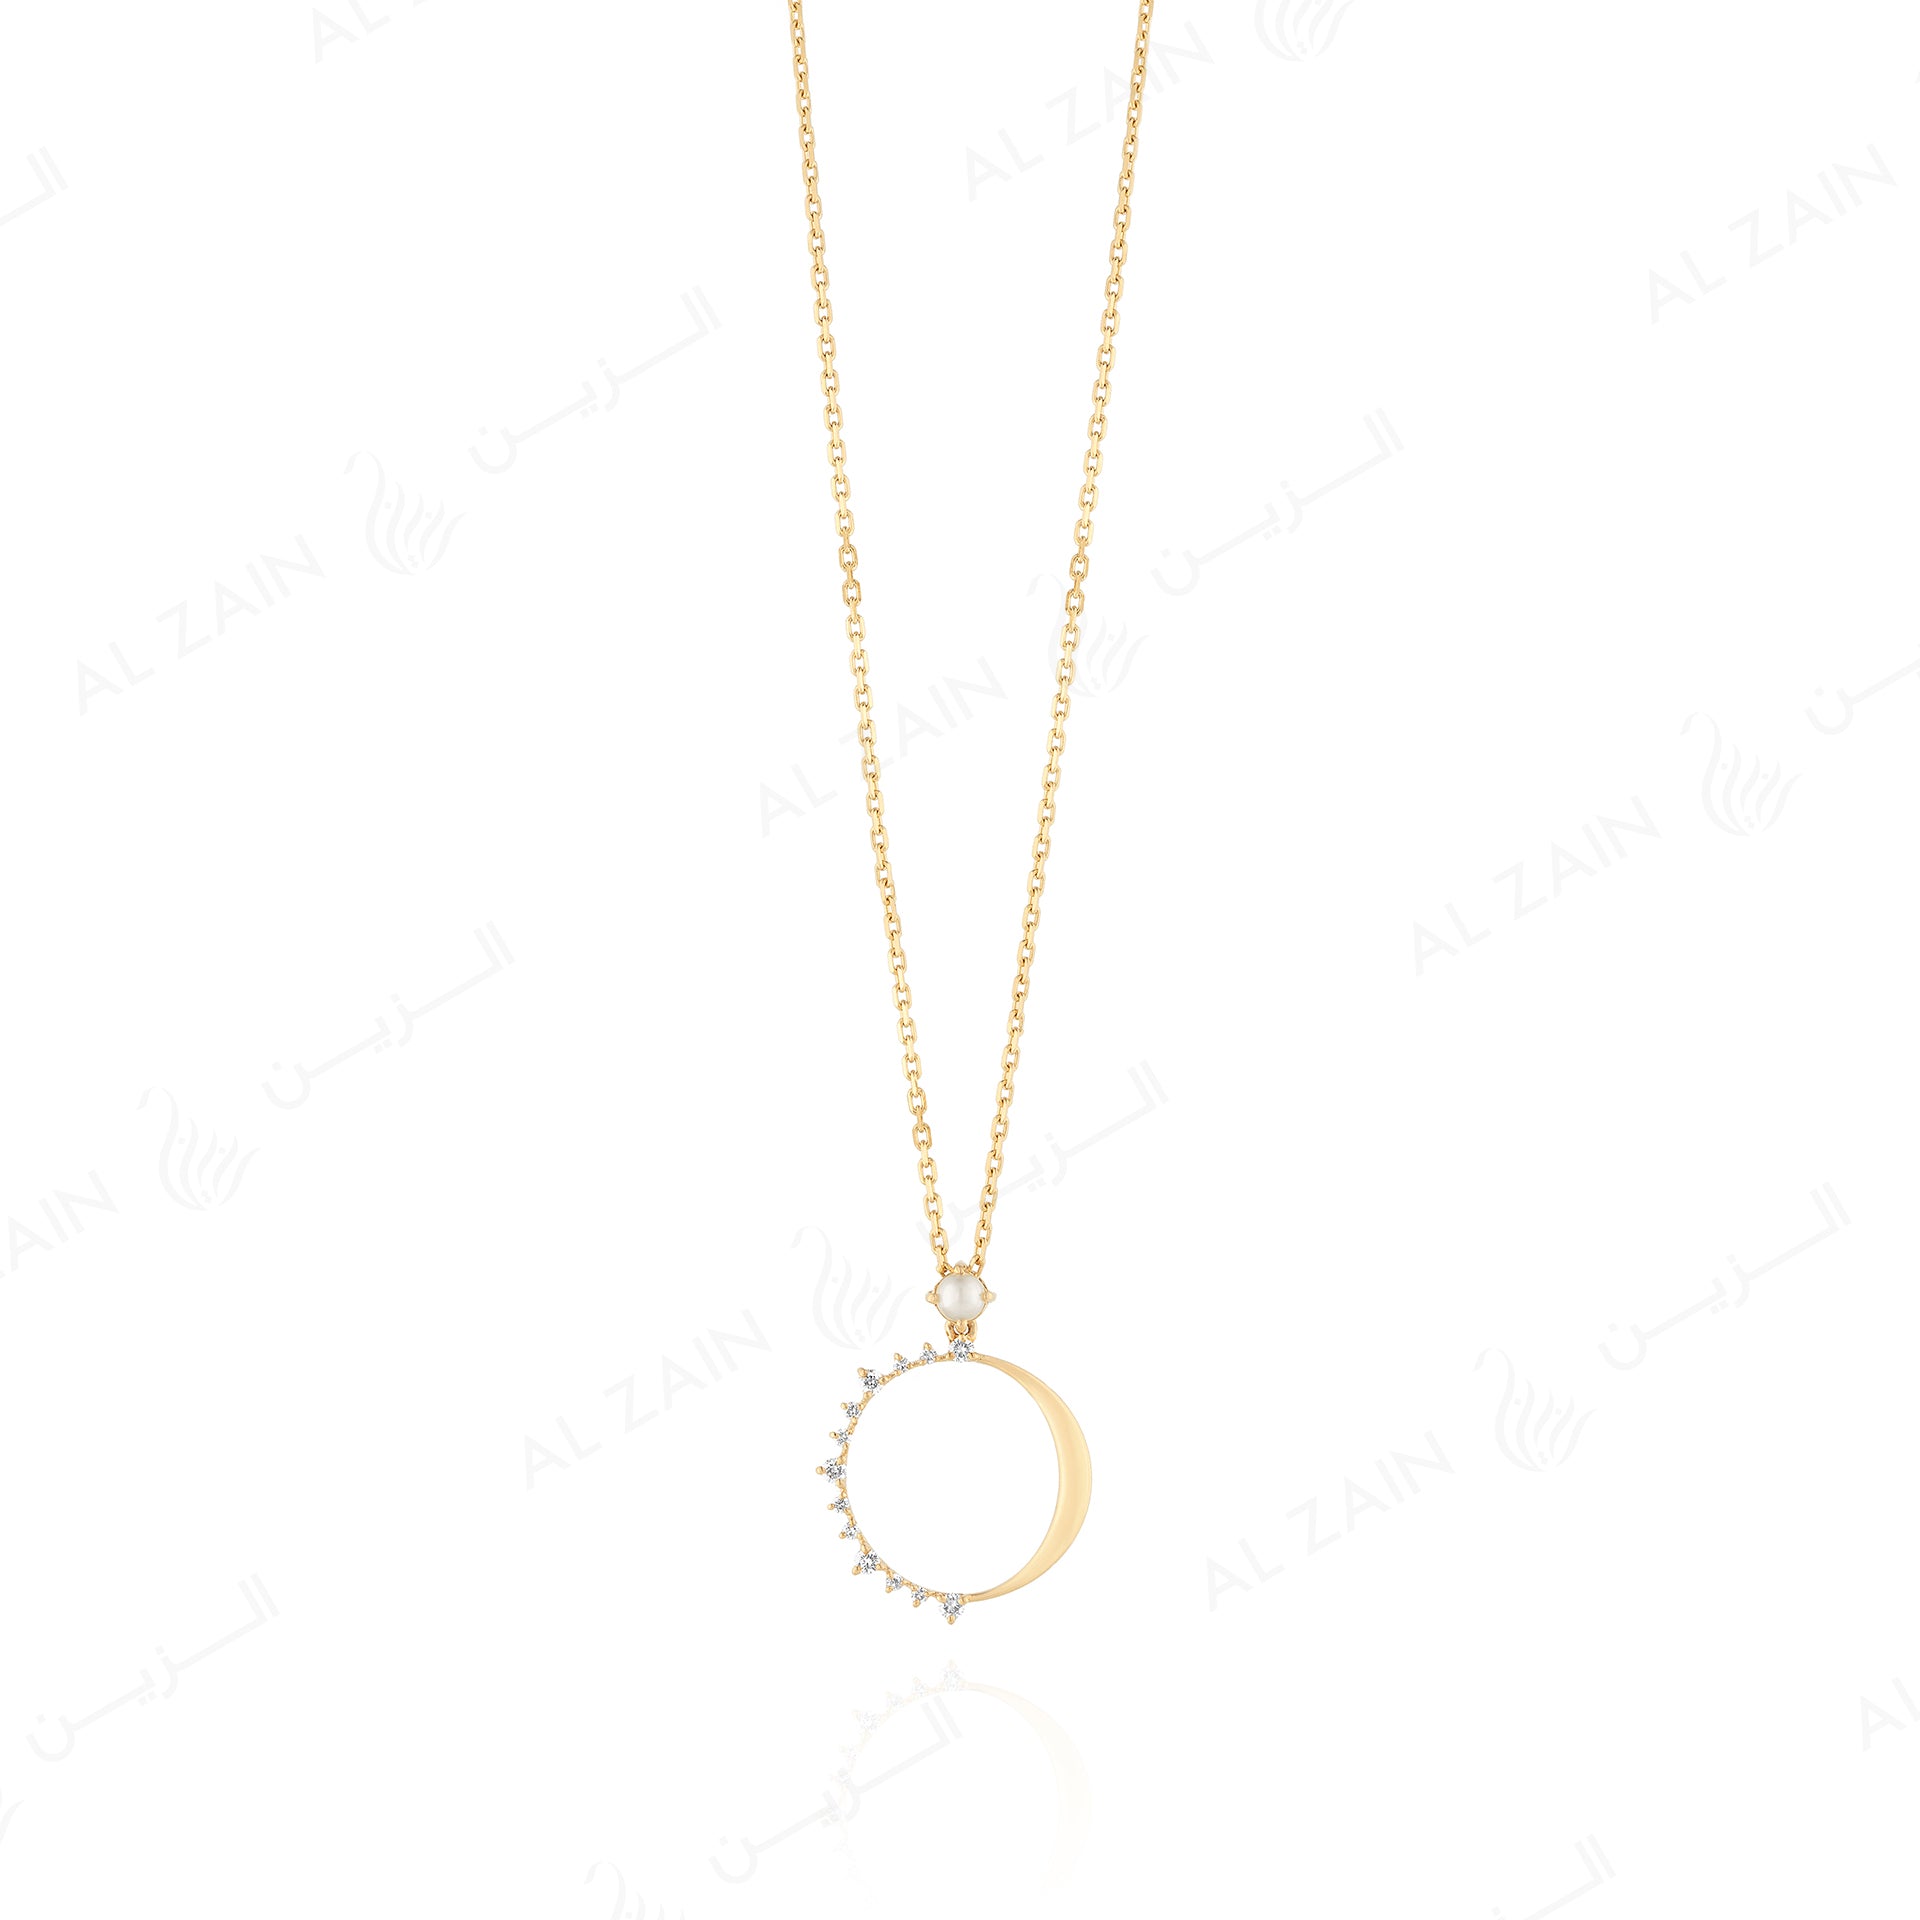 Melati "Eclipse" necklace in Yellow Gold with Diamonds